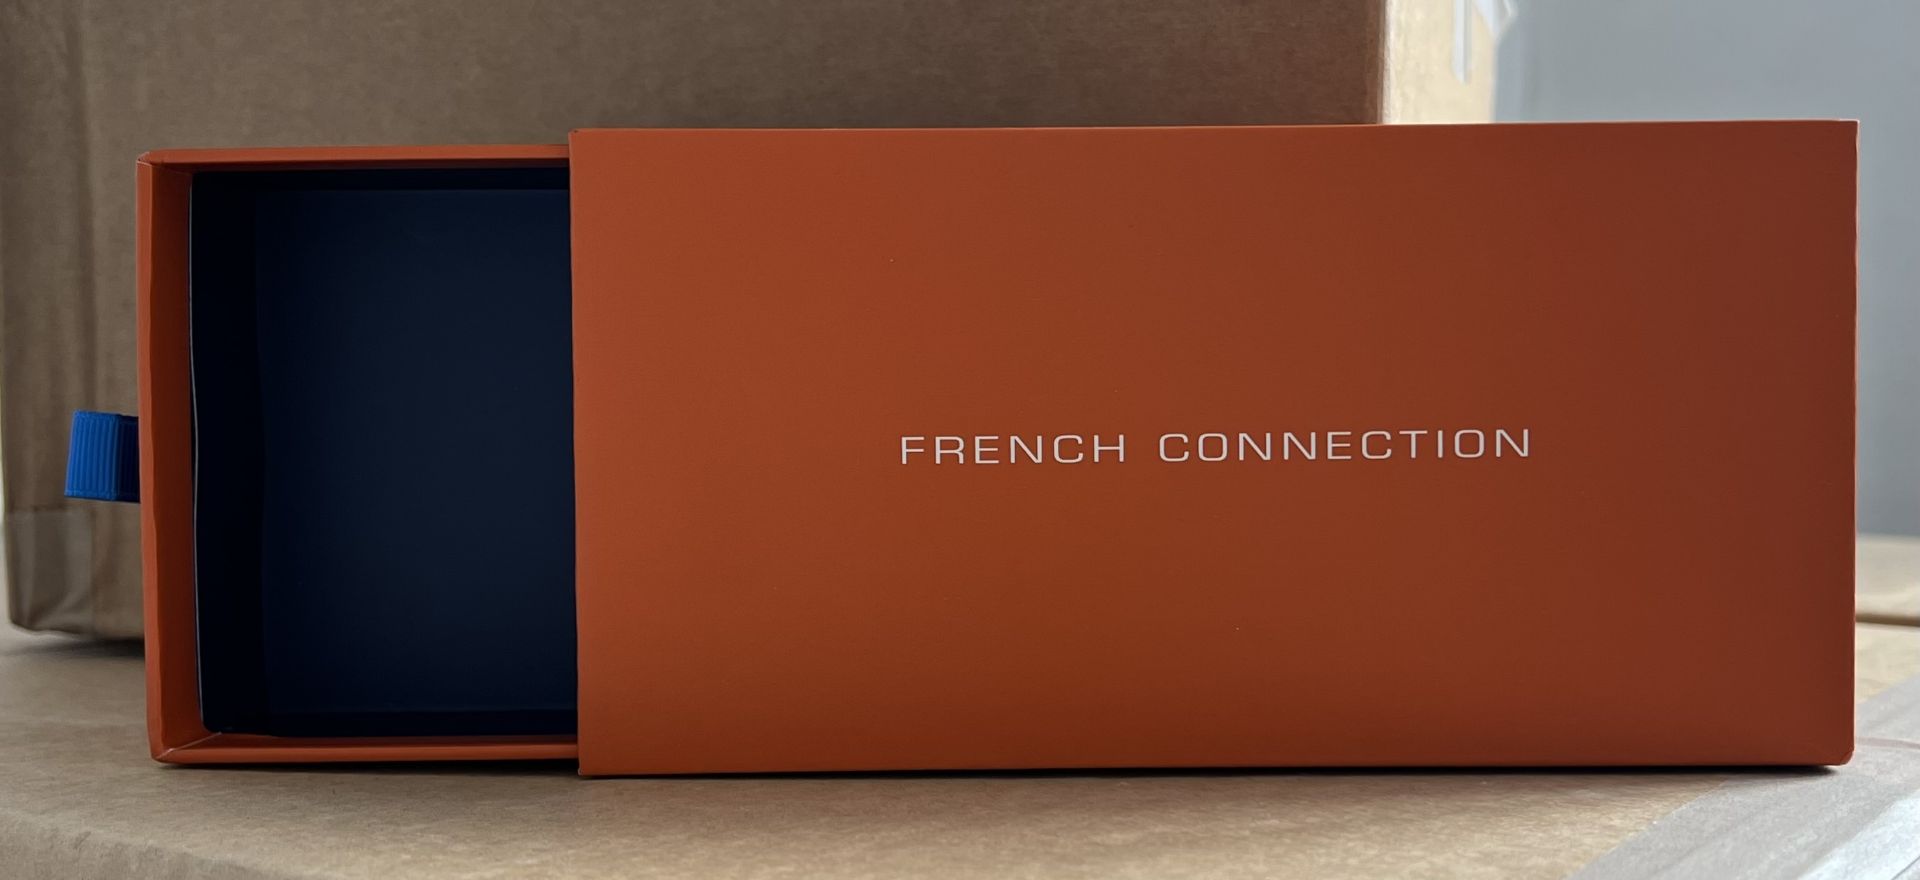 176 x French Connection Glasses / Sunglasses Orange Boxes - (NEW) - SELL FOR Â£880+ !